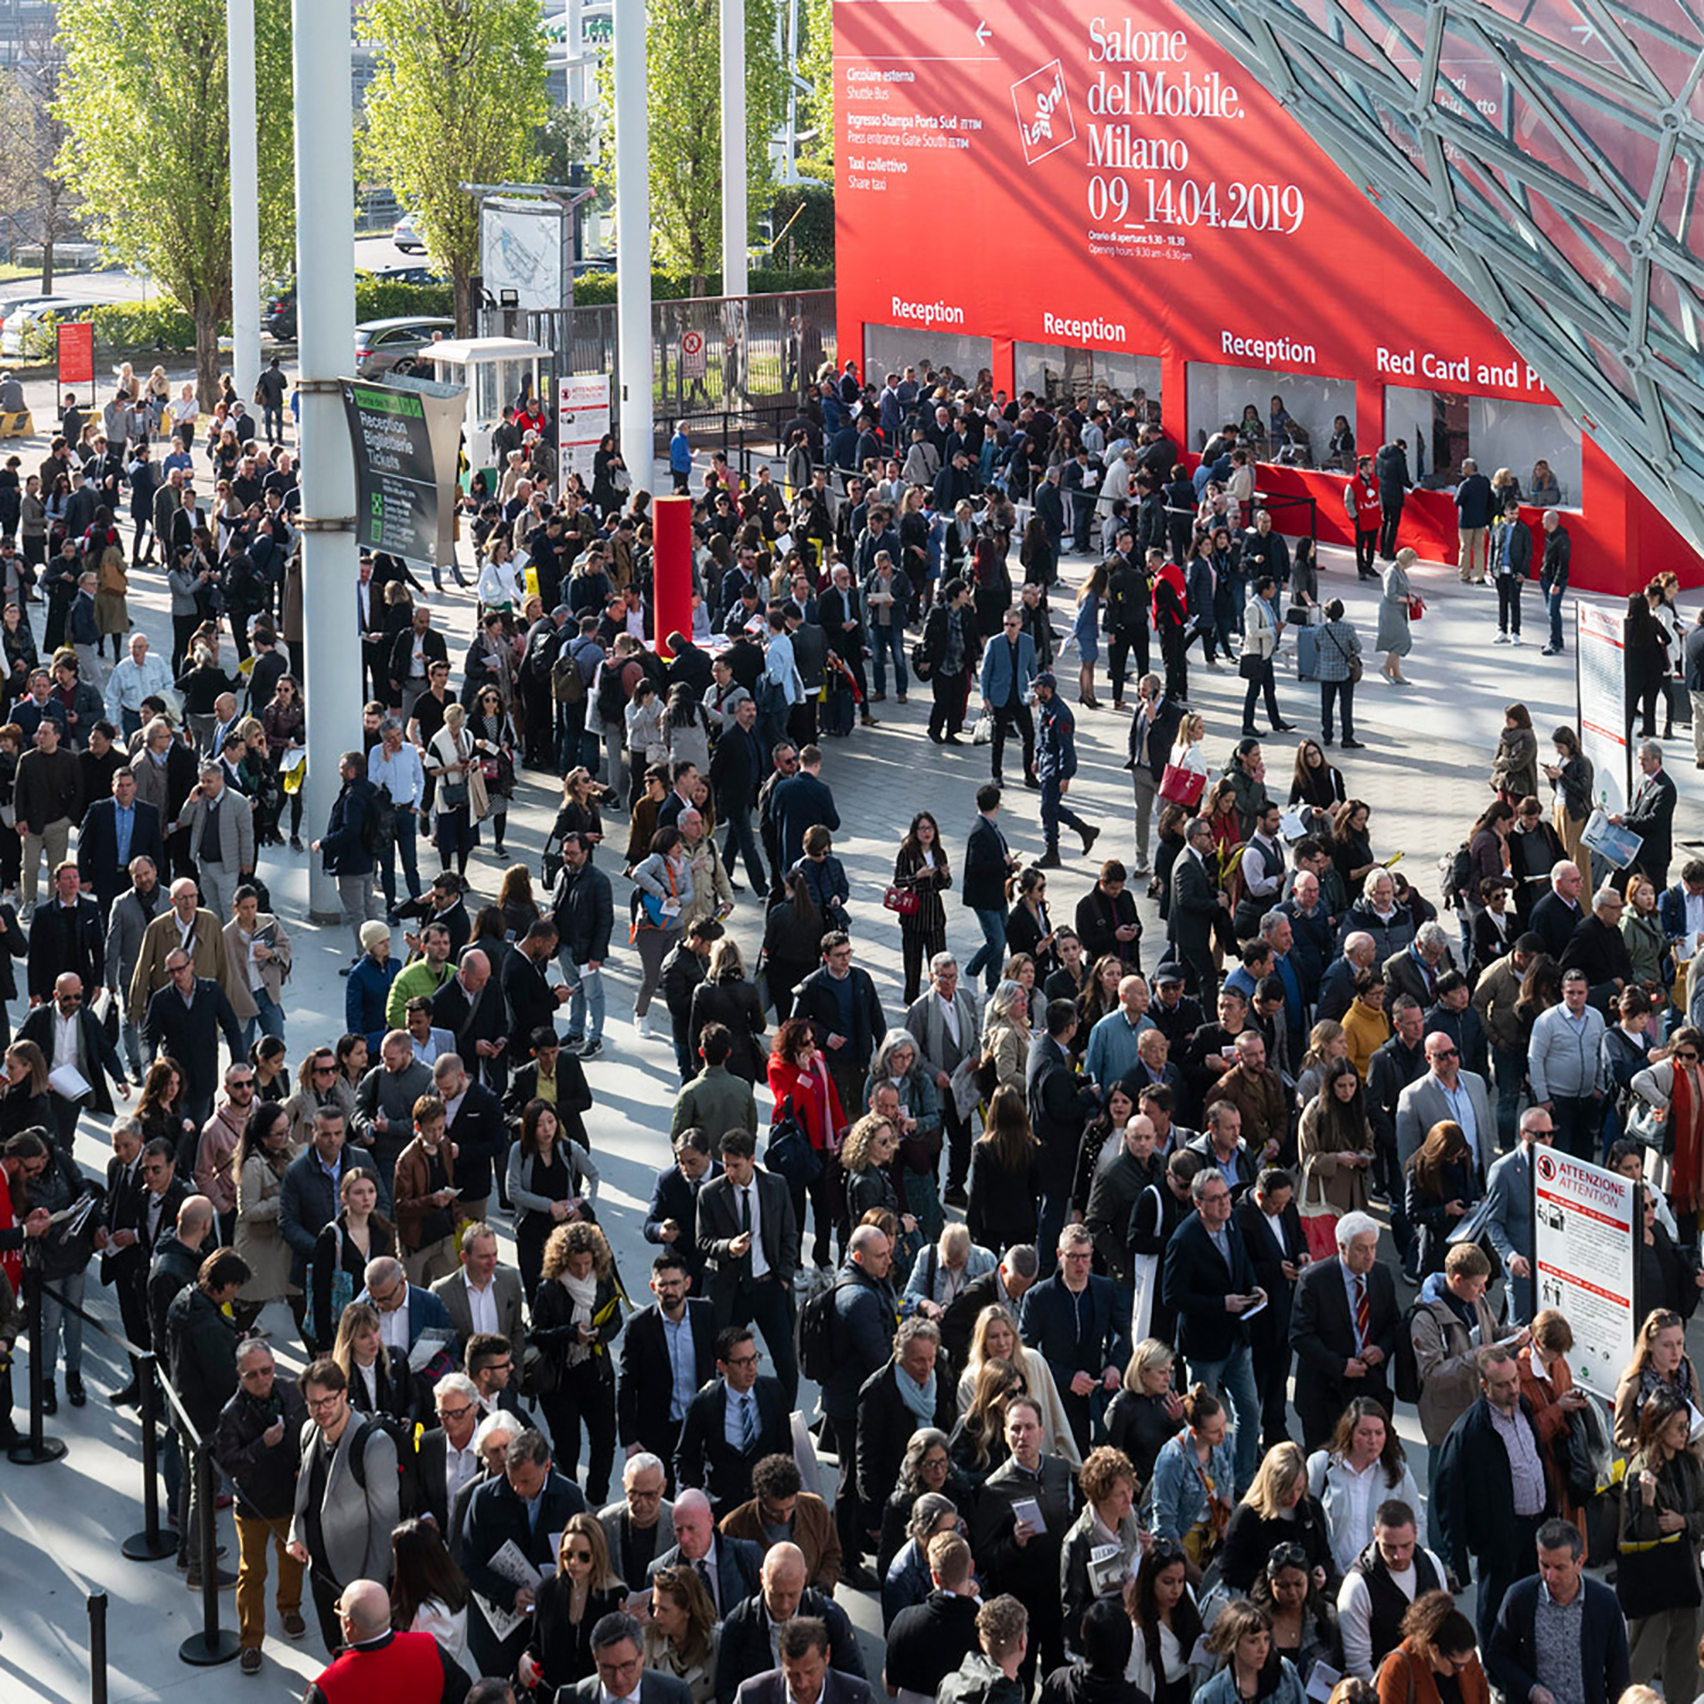 Salone del Mobile.Milano's 60th edition to take place from June 7-12, 2022